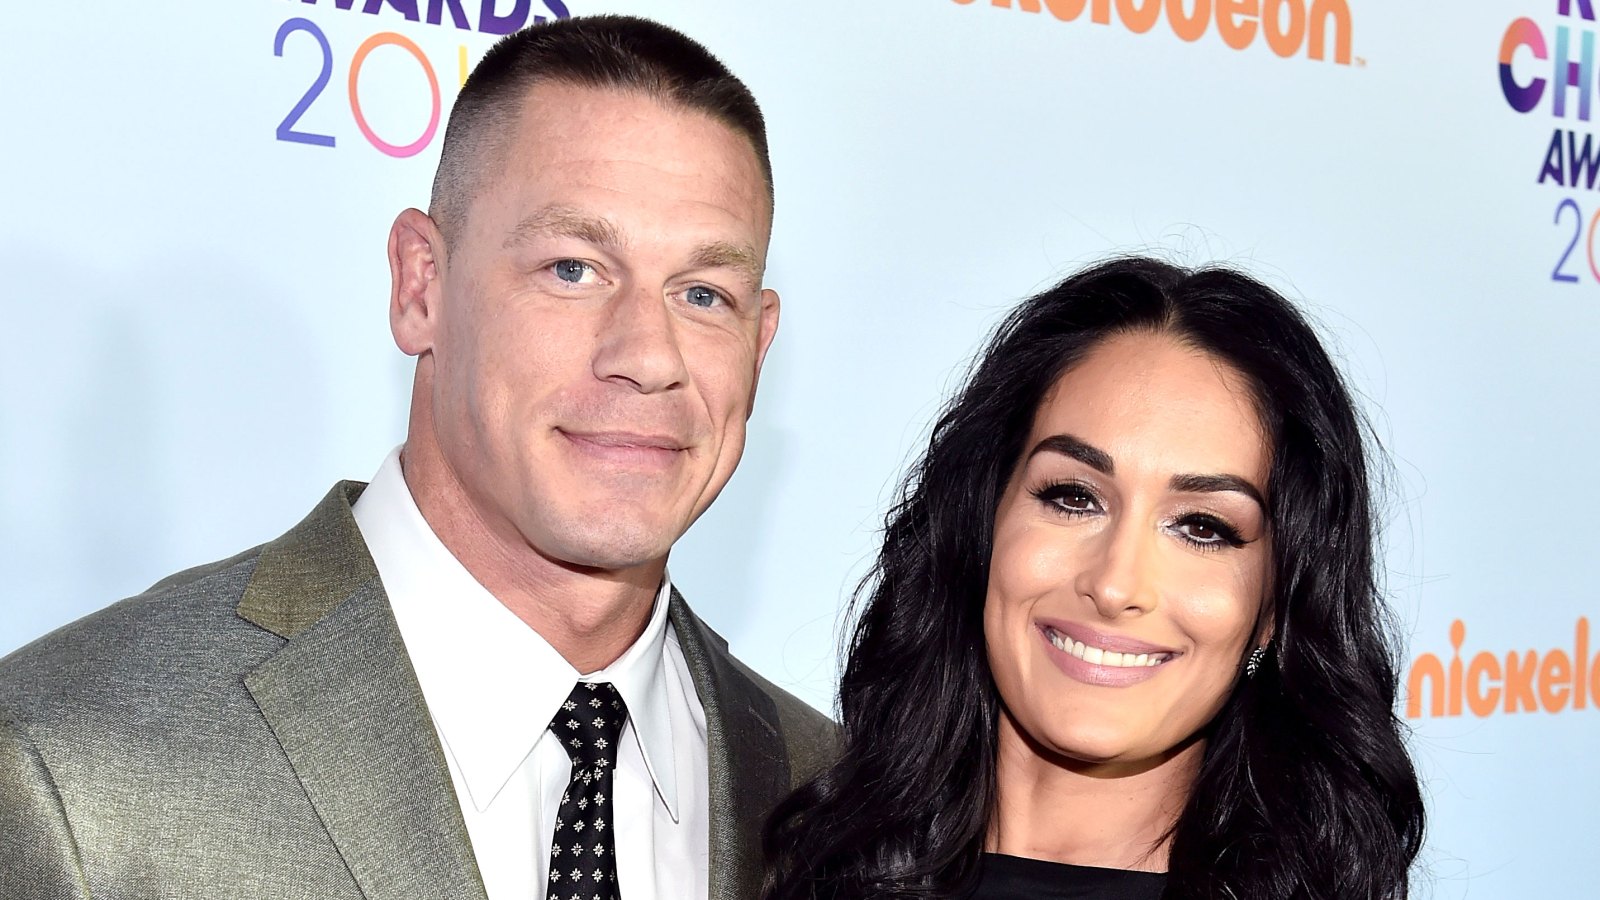 Nikki Bella on Seeing John Cena Move on With Another Woman: 'It's Gonna Kill Me'